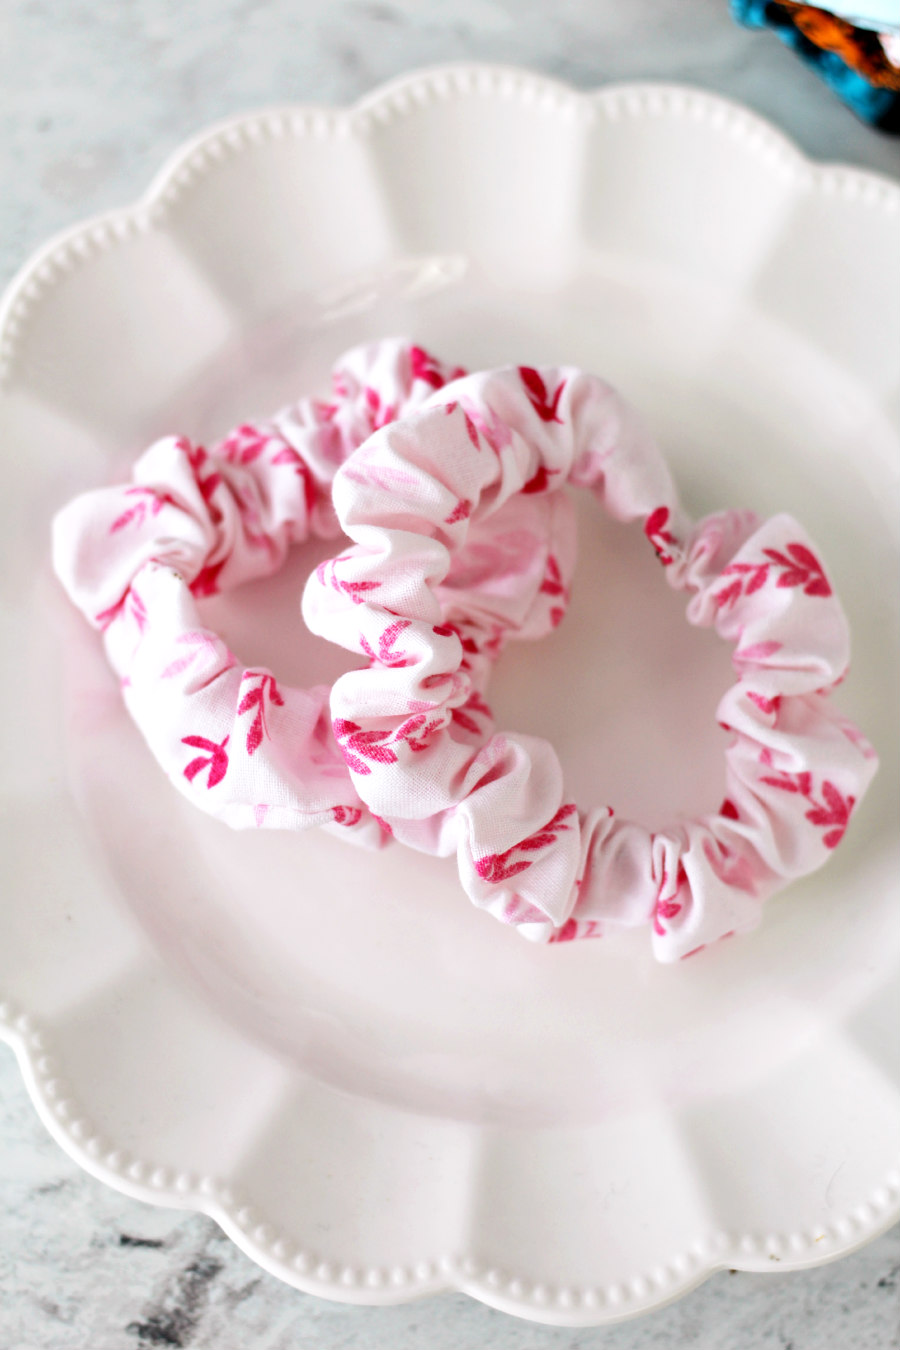 Pink Foilage Leaves Scrunchie Elastic Hair Tie from Holoka Home on Etsy. Pink scrunchie features dark pink foliage. Two scrunchies are placed on white plate.